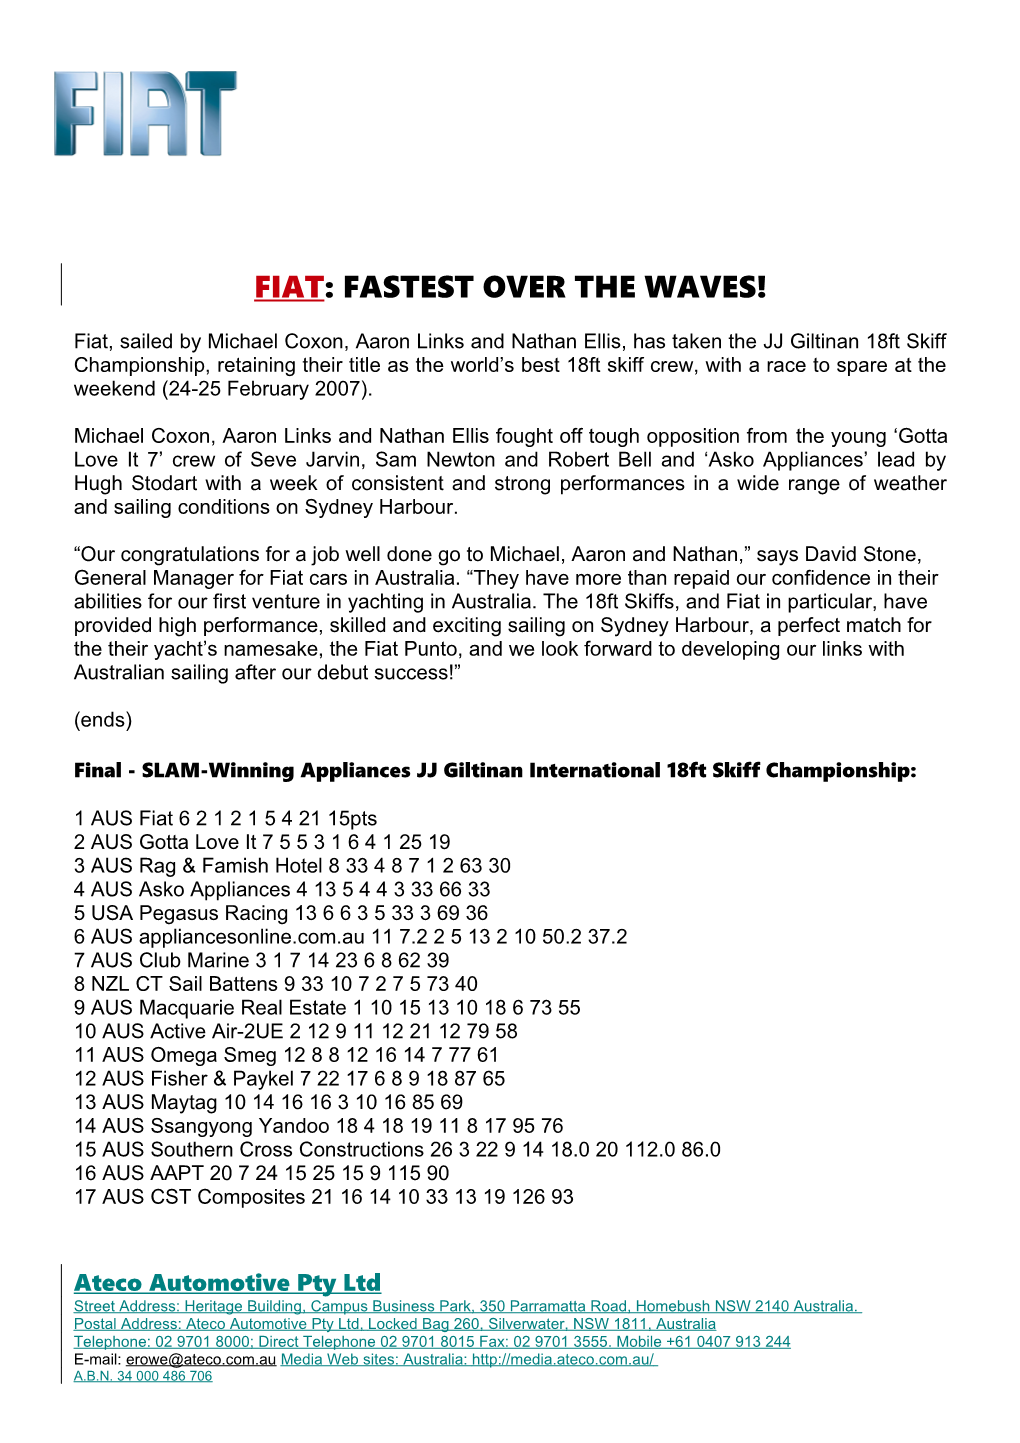 Fiat : Fastest Over the Waves!